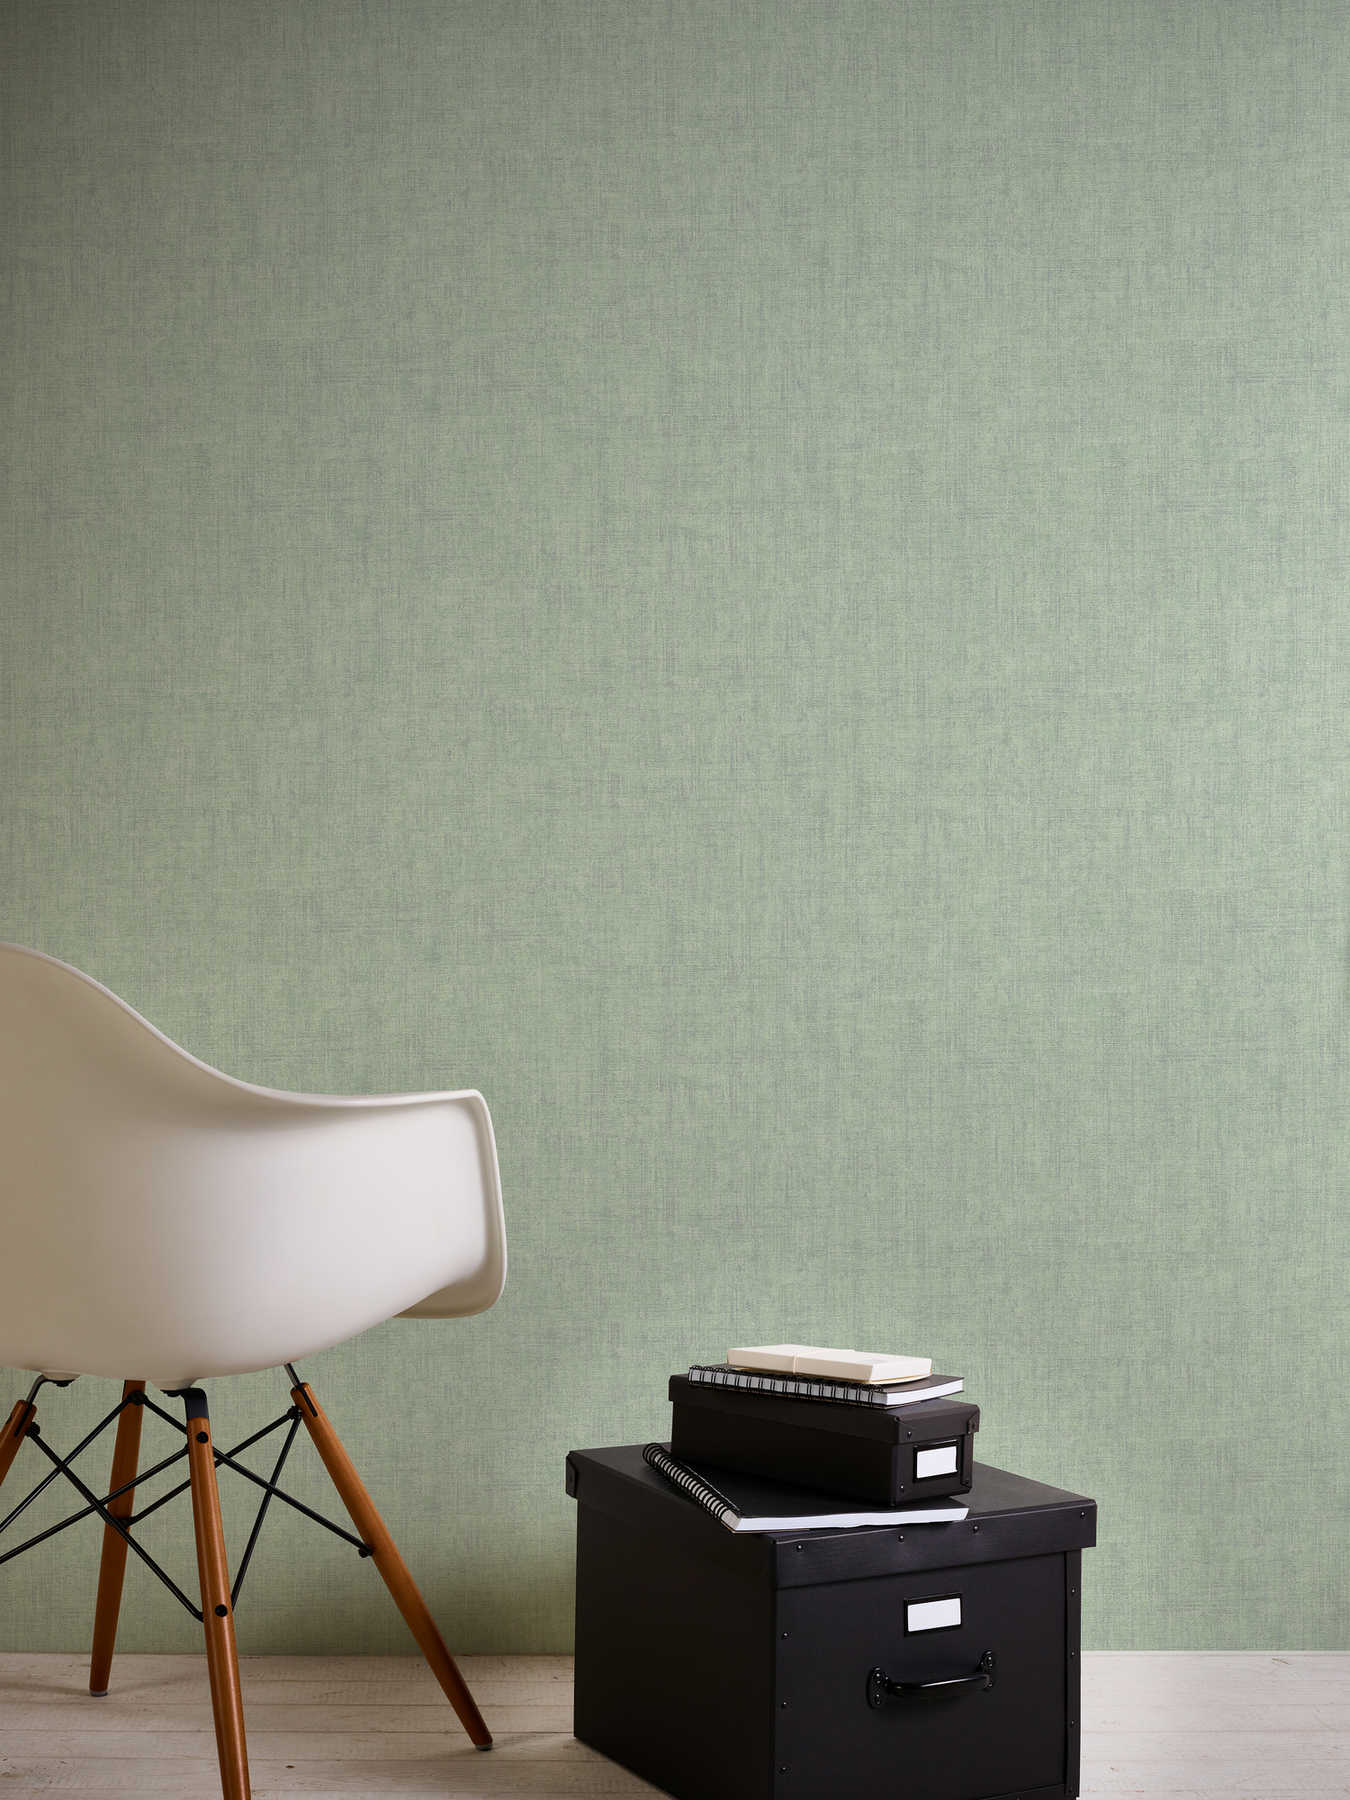             Melange wallpaper green silver with metallic accents
        